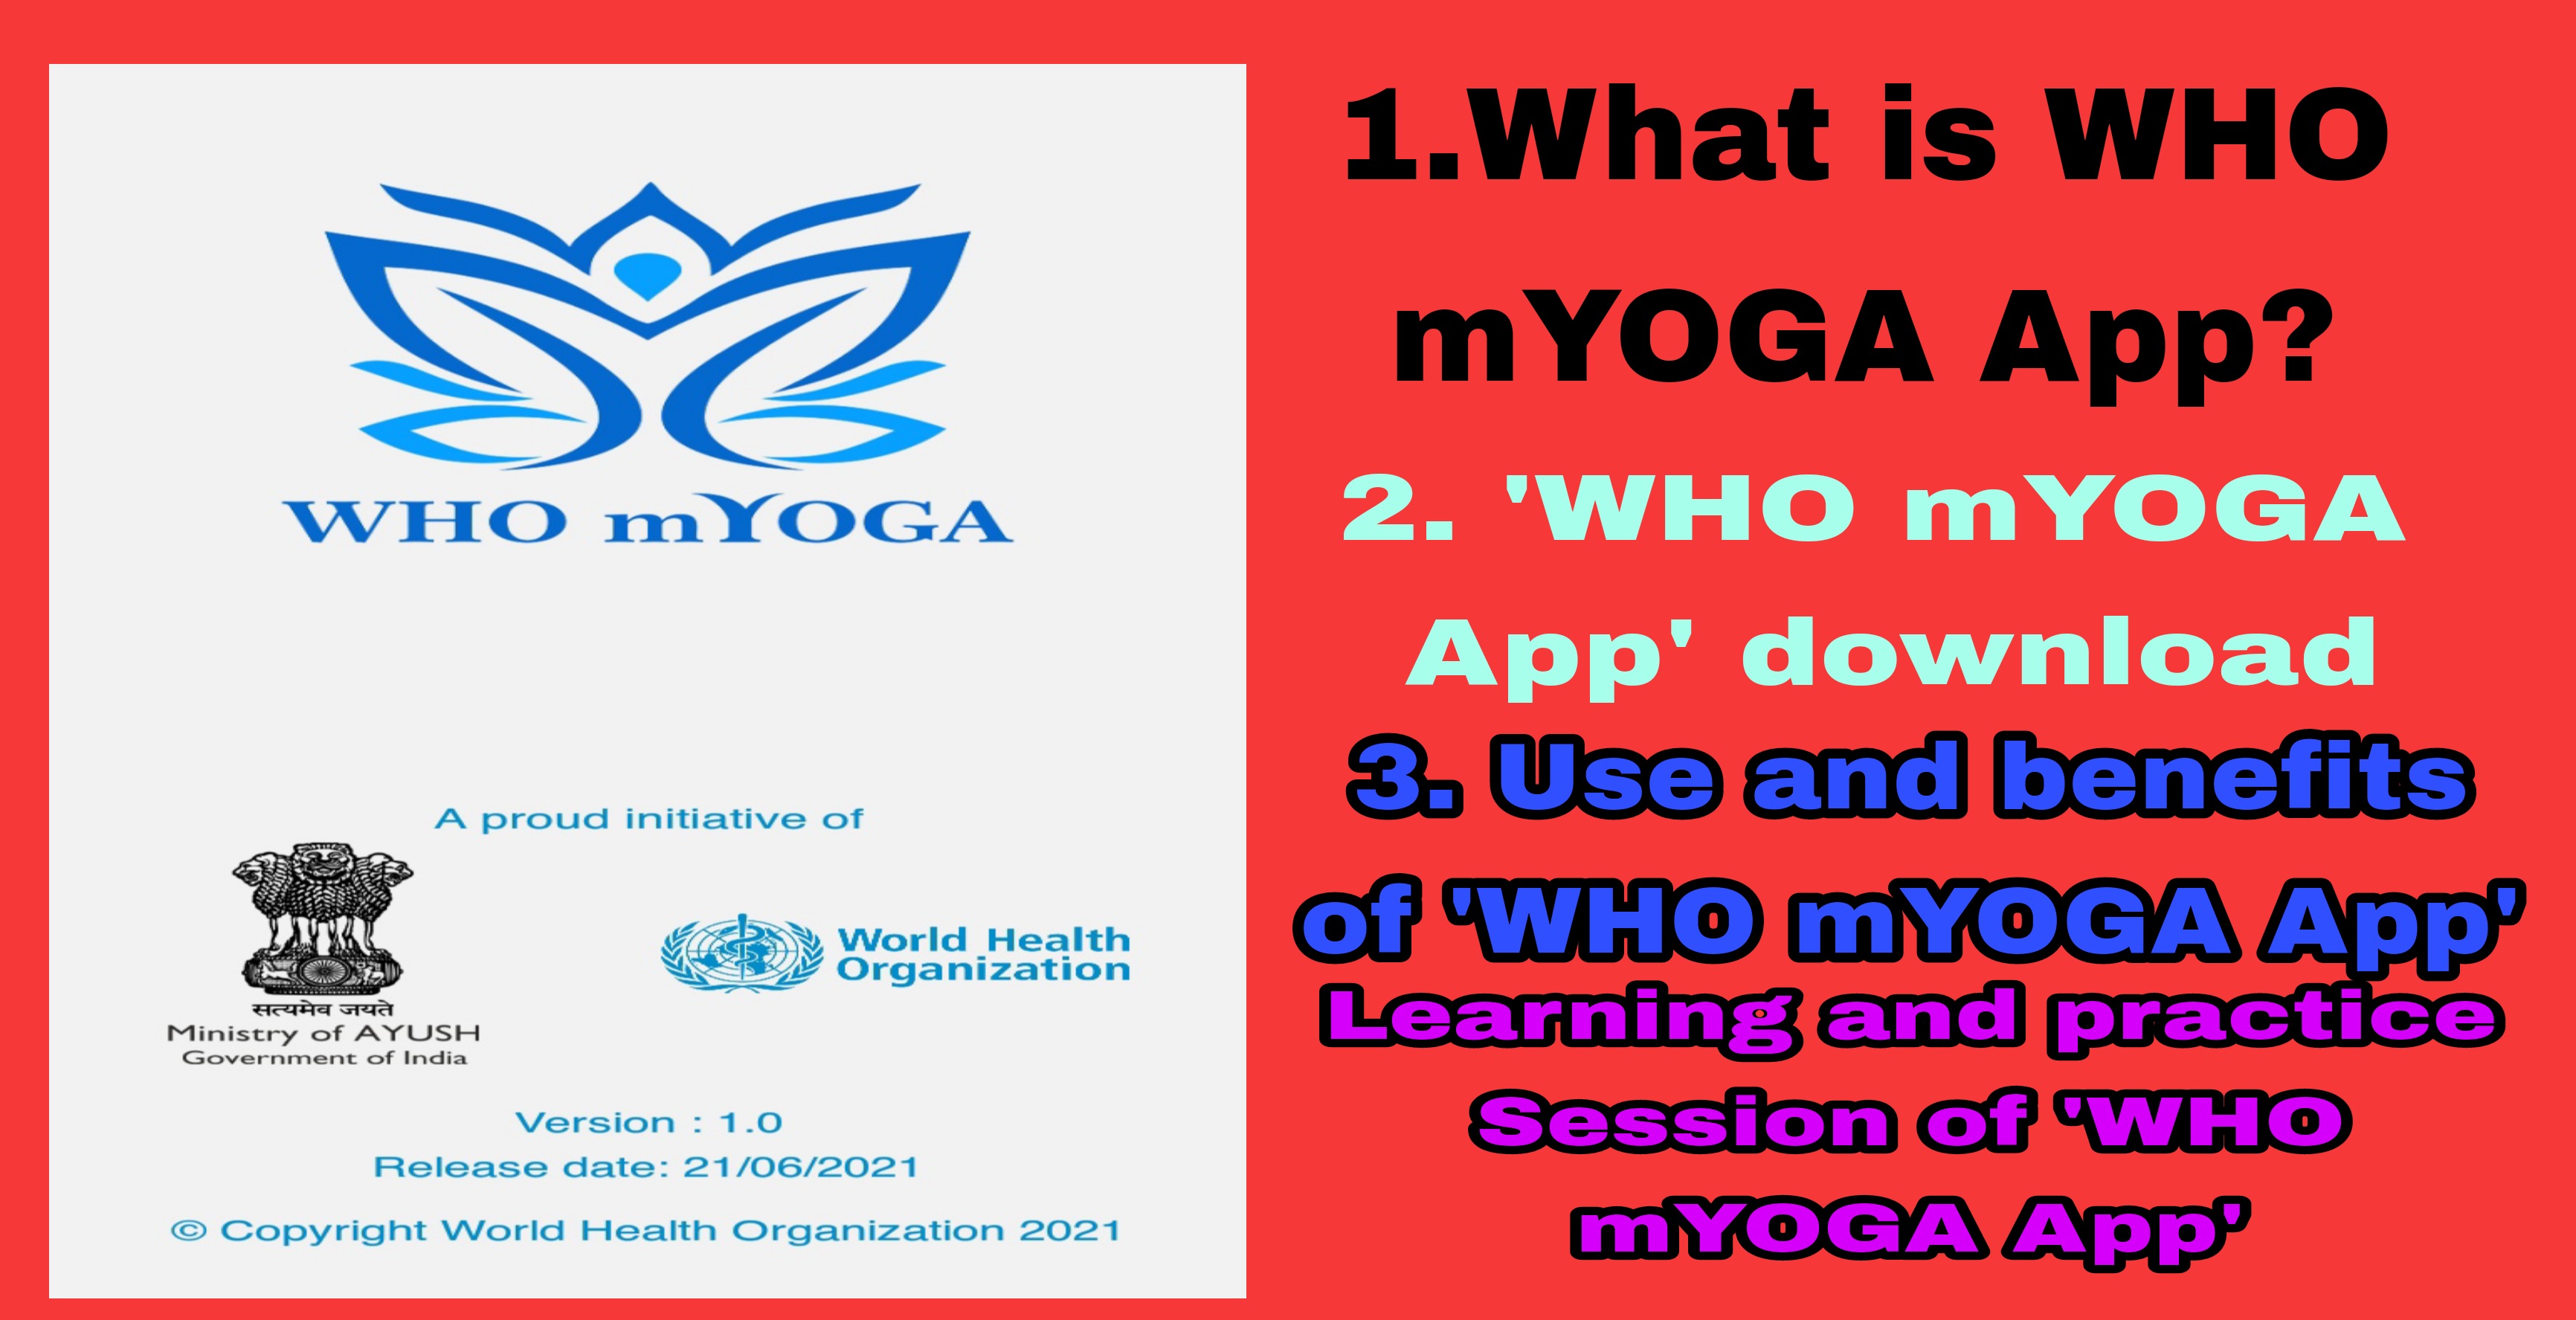 —

H&amp;E

&lt;__ __
WHO mYOGA 2. "WHO mYOGA
App' download

A proud initiative of

World Health
Organization

Ministry of AYUSH

Government of India

Version : 1.0
Release date: 21/06/2021

© Copyright World Health Organization 2021